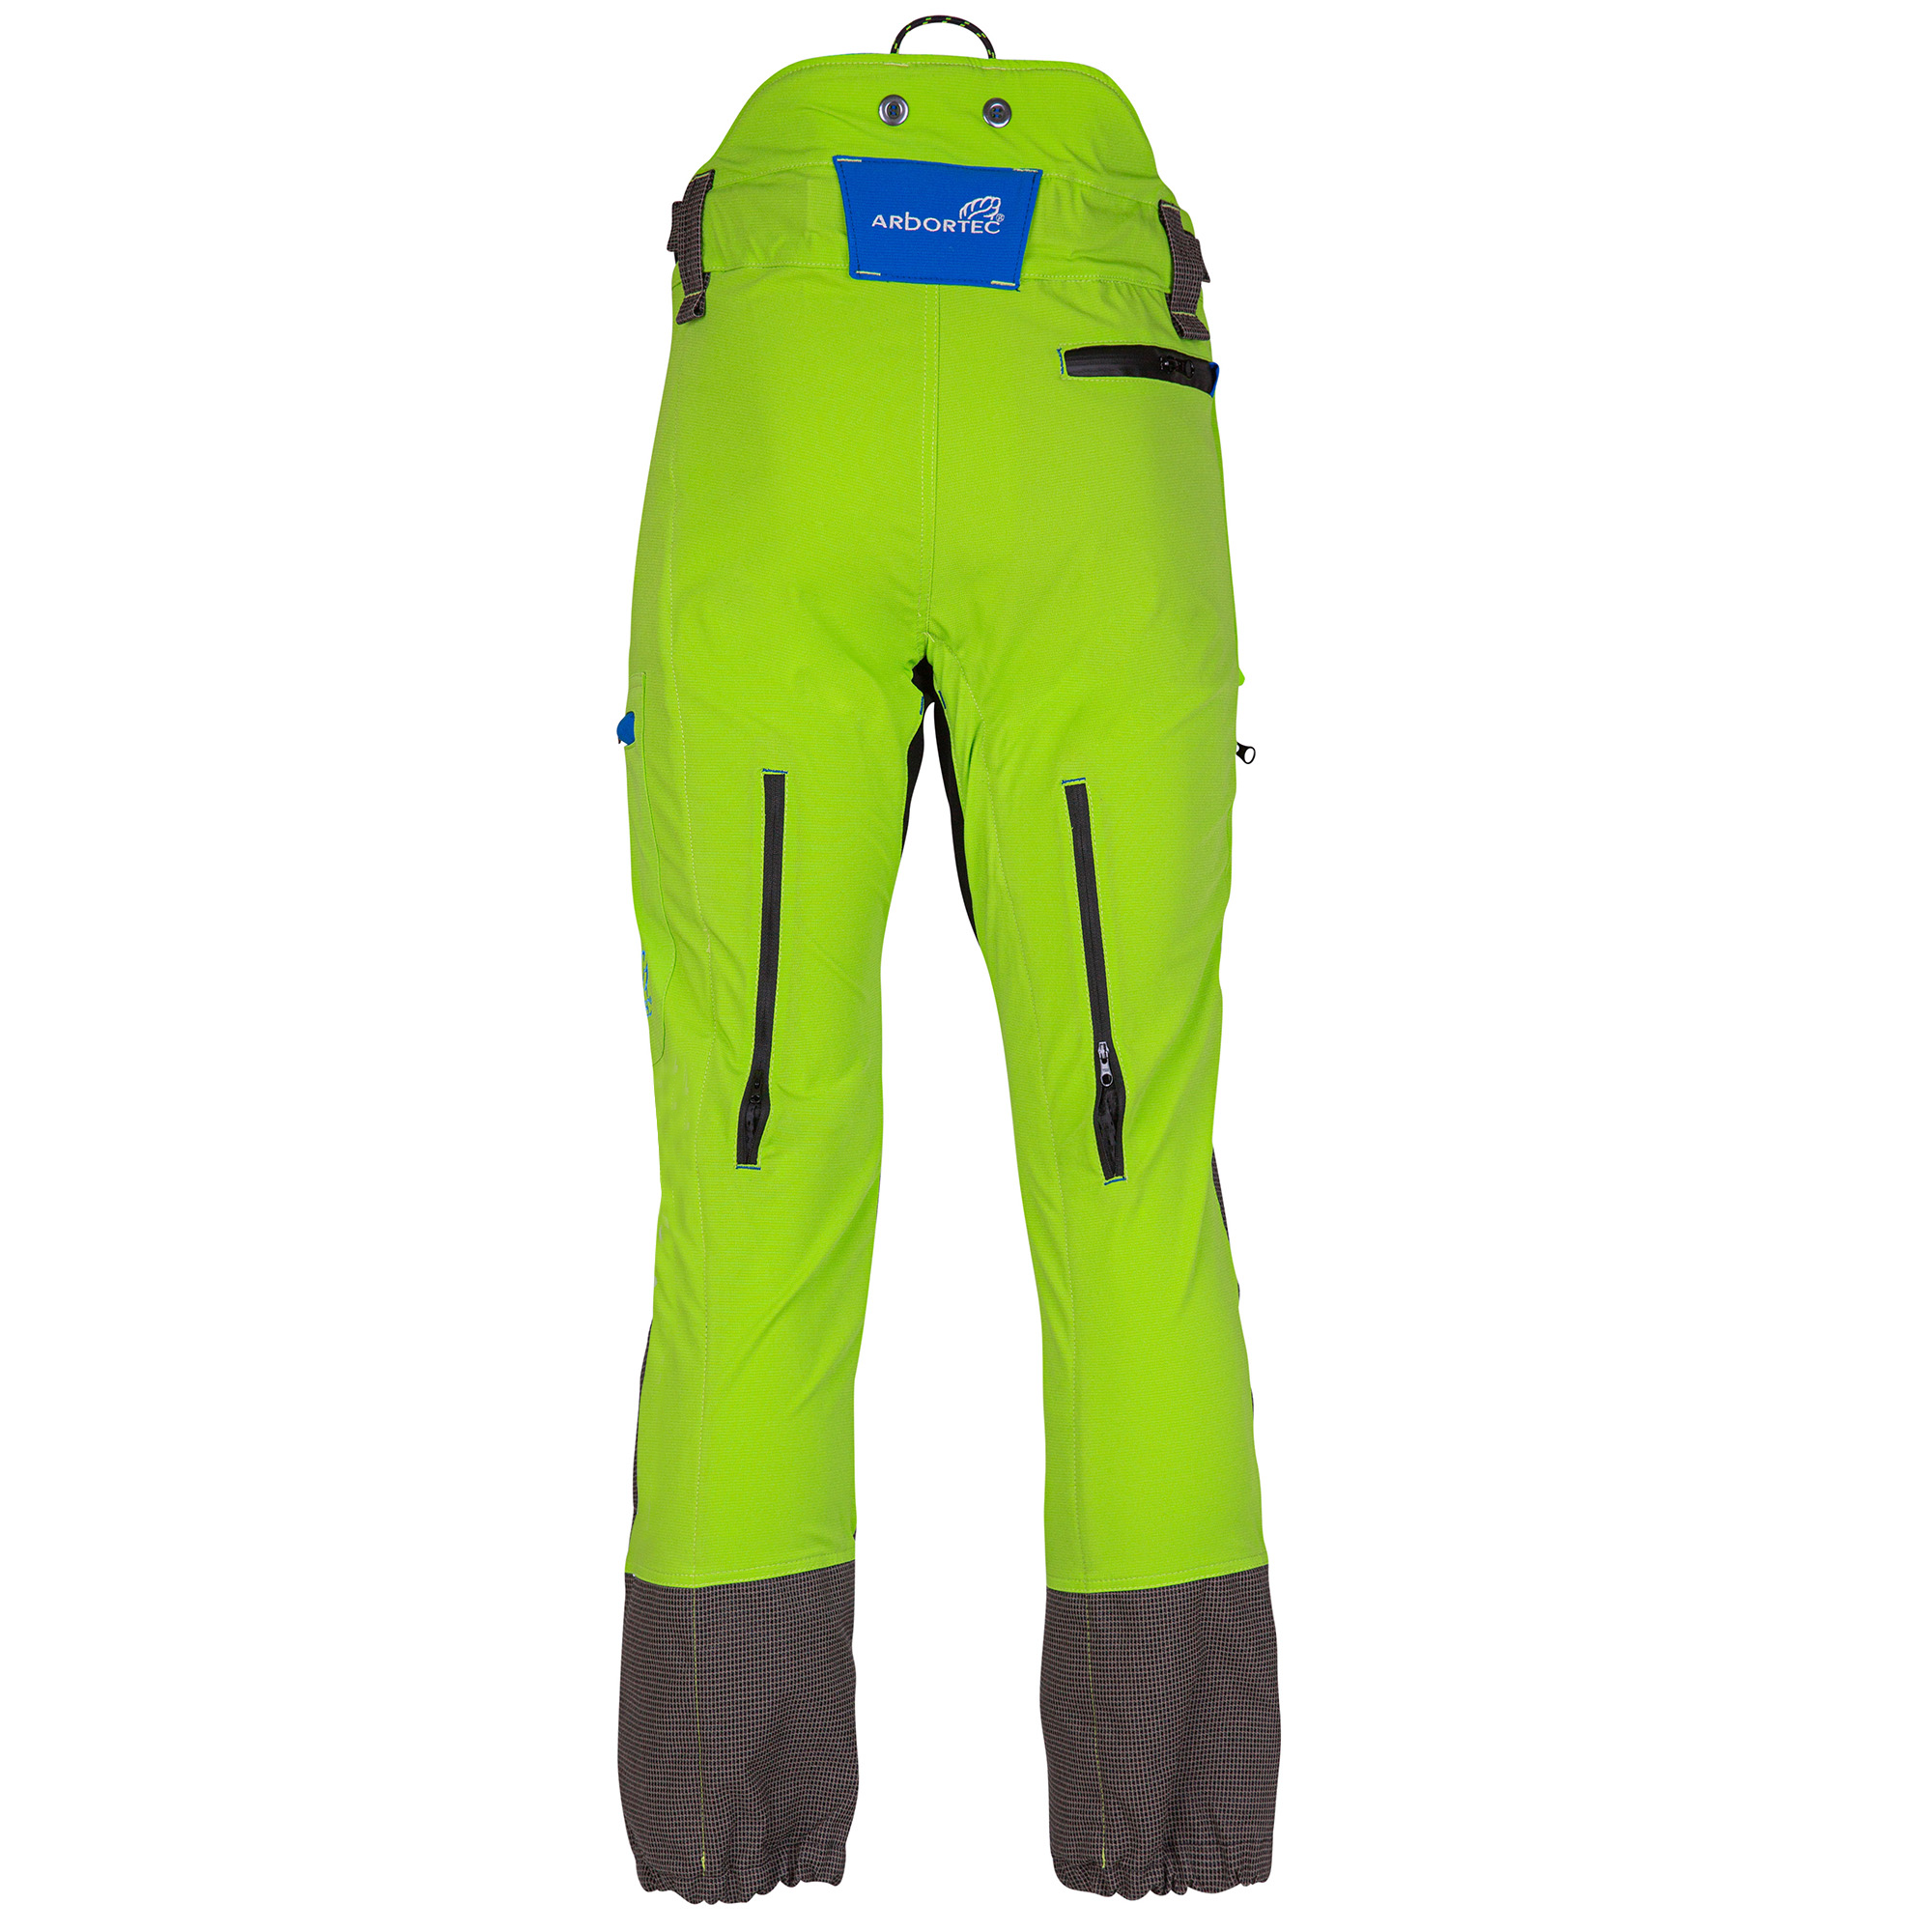 AT4060 Breatheflex Pro Chainsaw Trousers Design A Class 1 - Lime